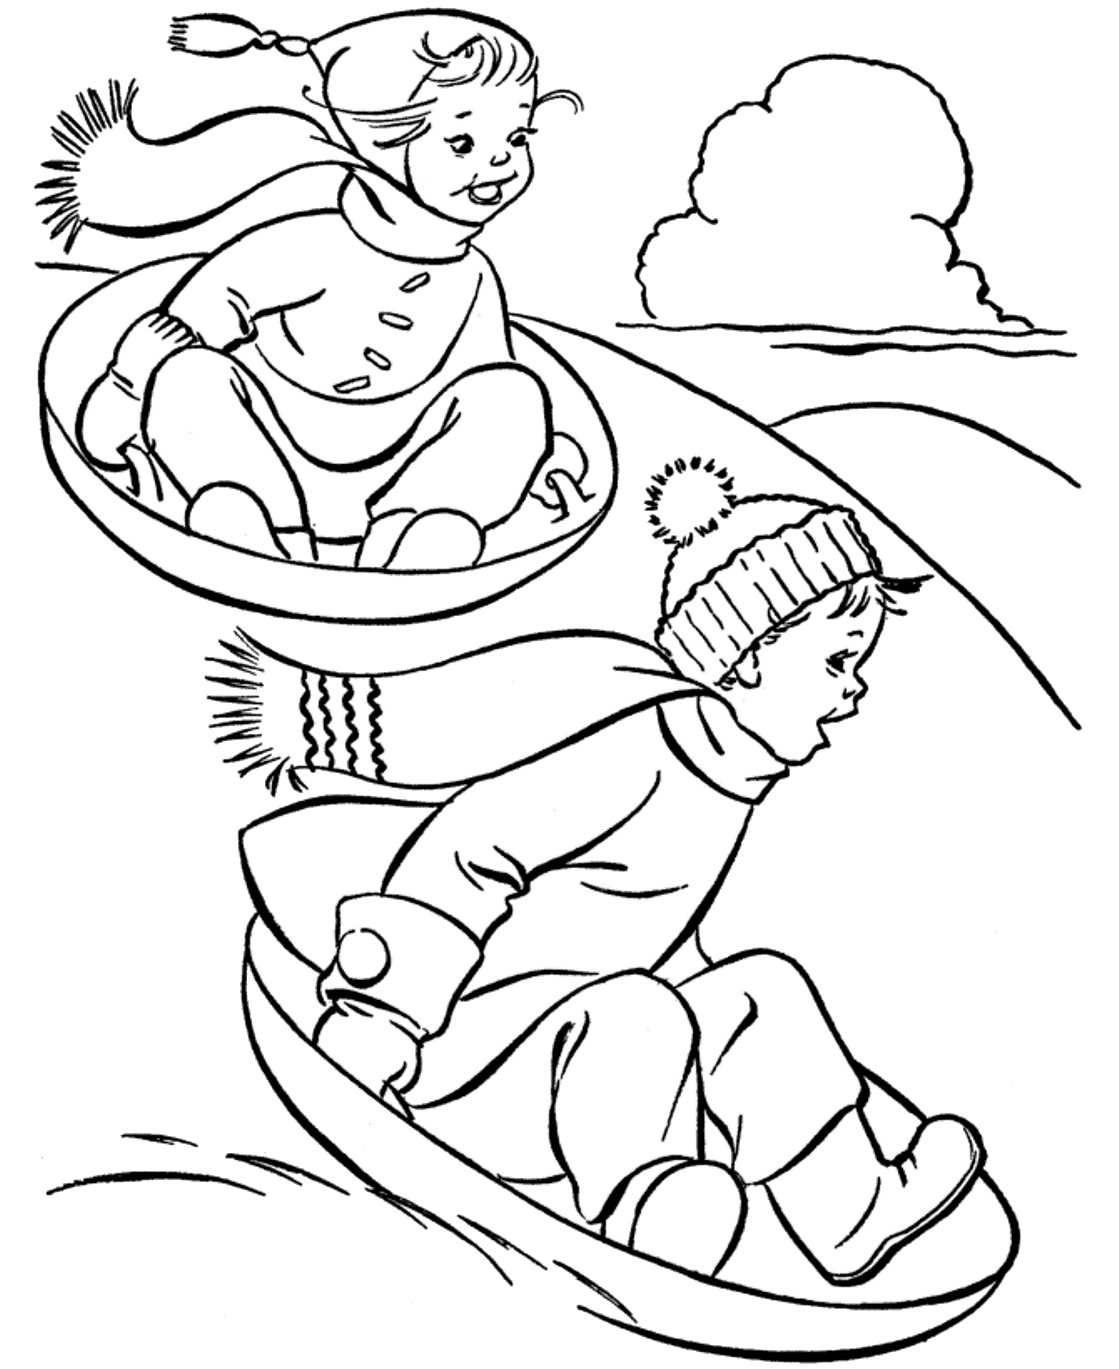 Winter Coloring Pages For Toddlers
 Sports graph Coloring Pages Kids Winter Sports